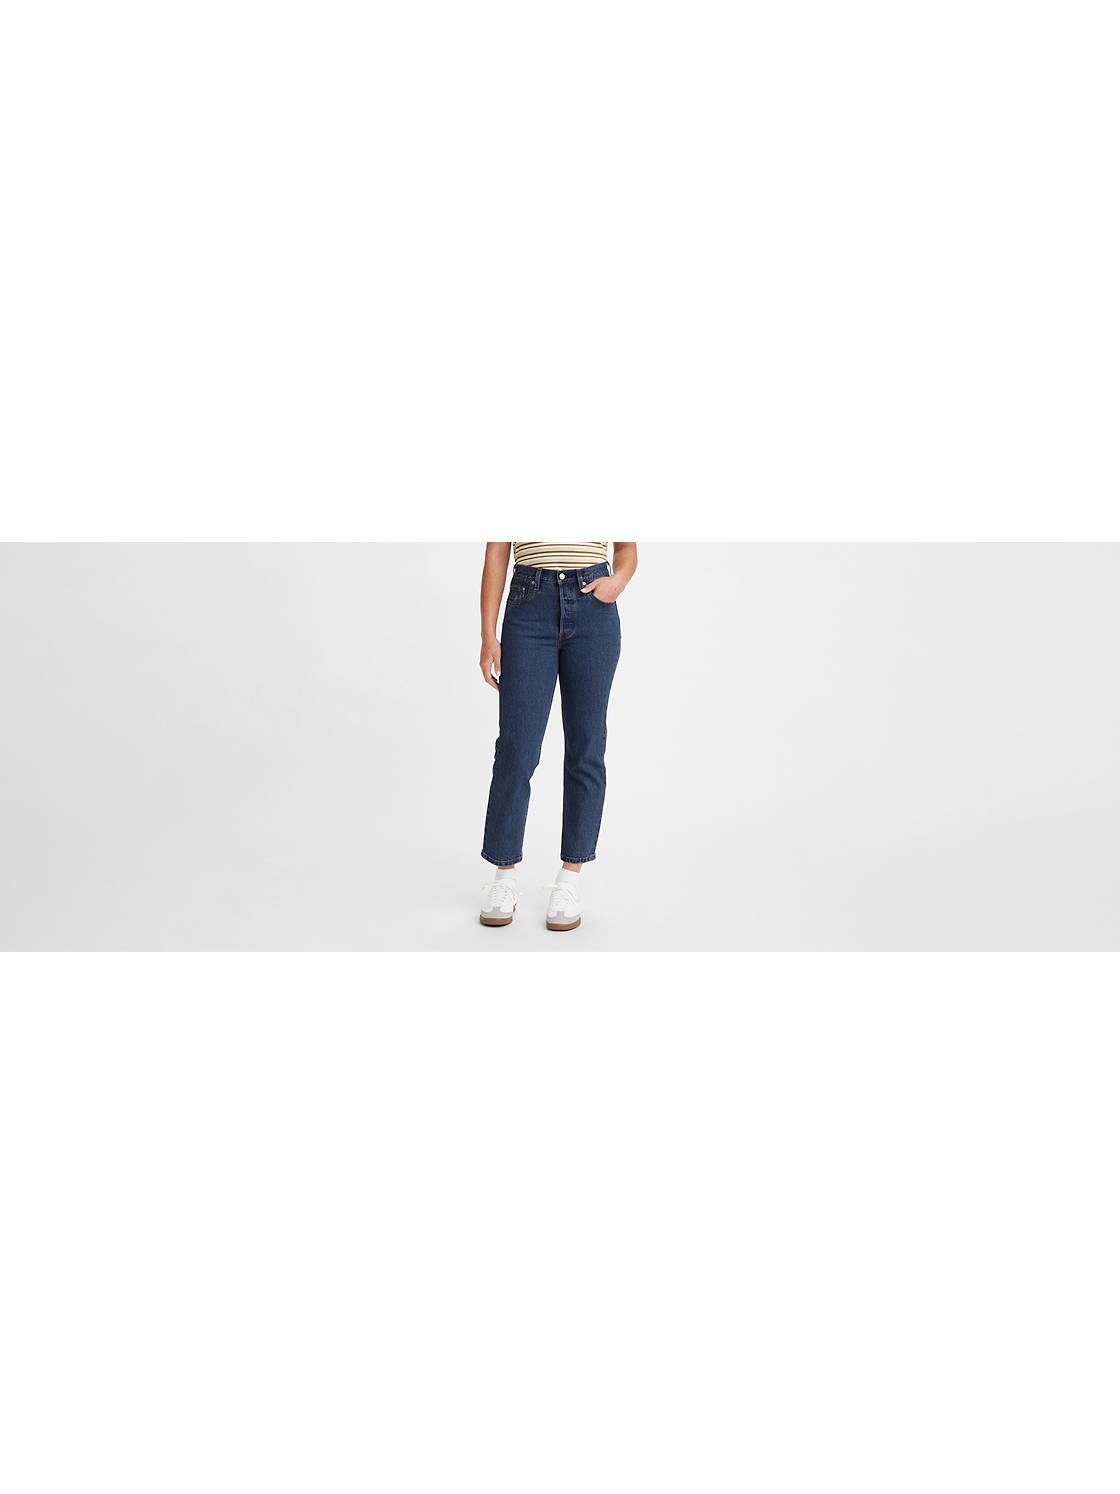  Levis 501 Mujer